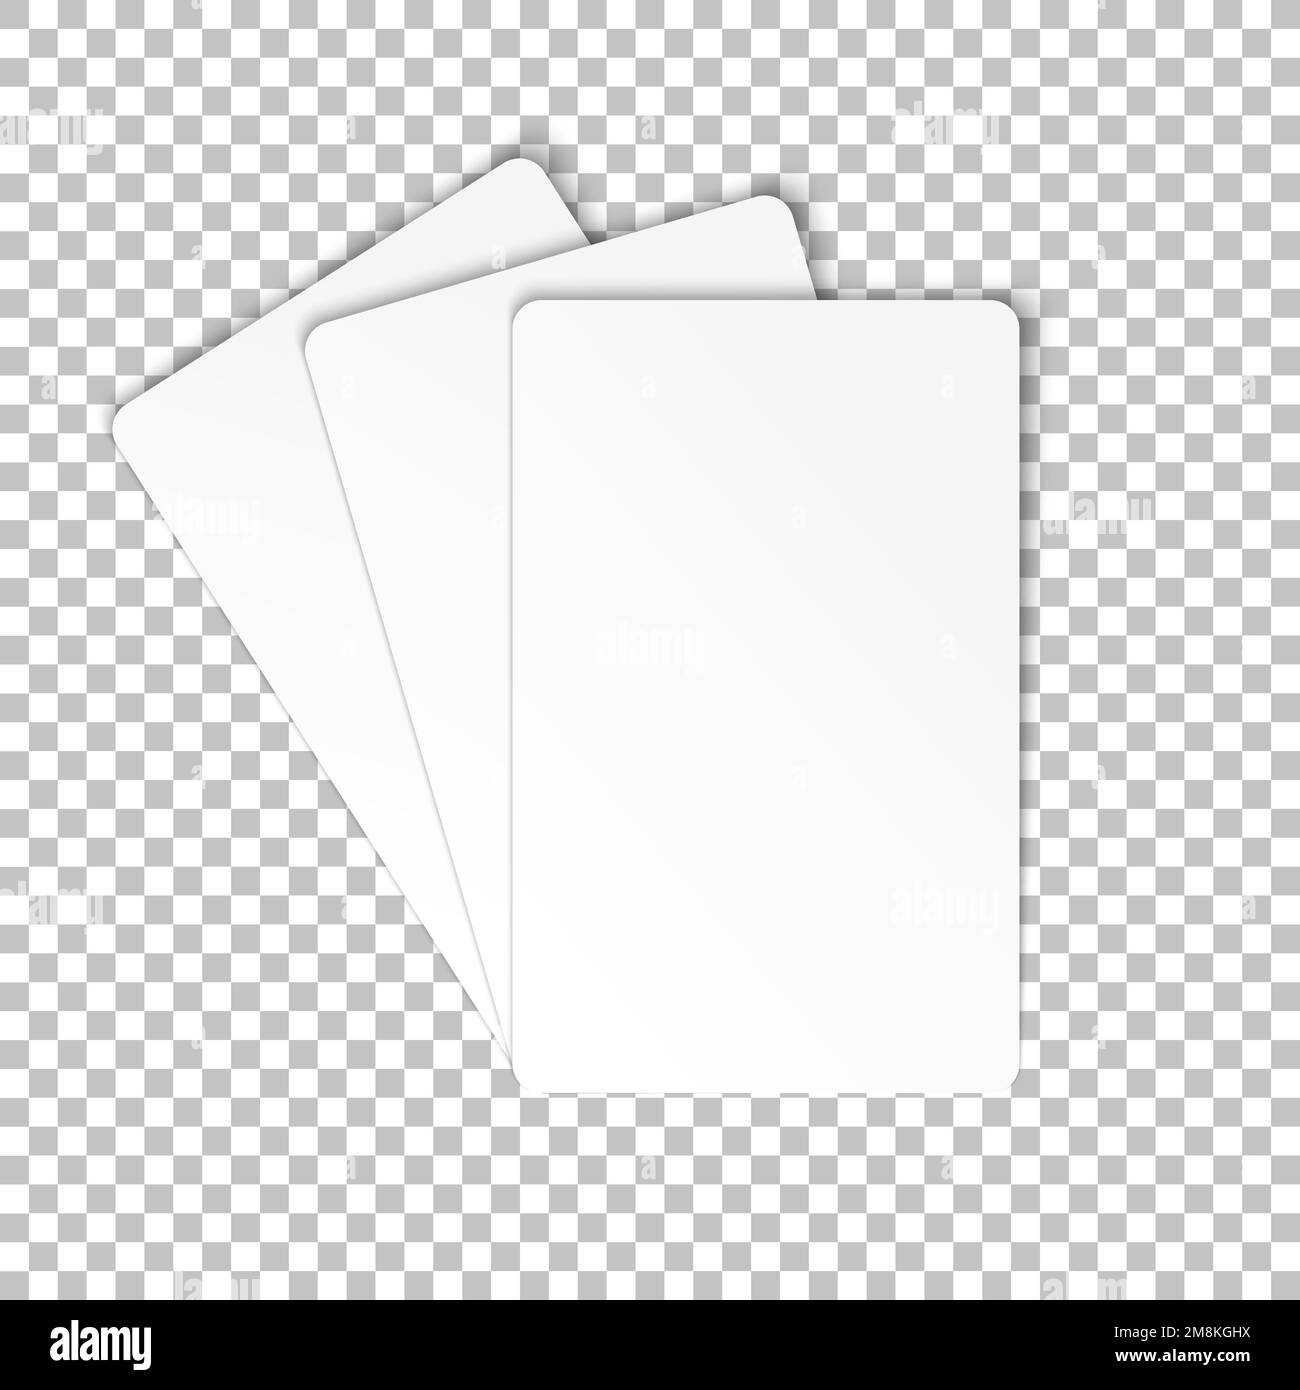 Blank playing card Stock Vector Images - Alamy